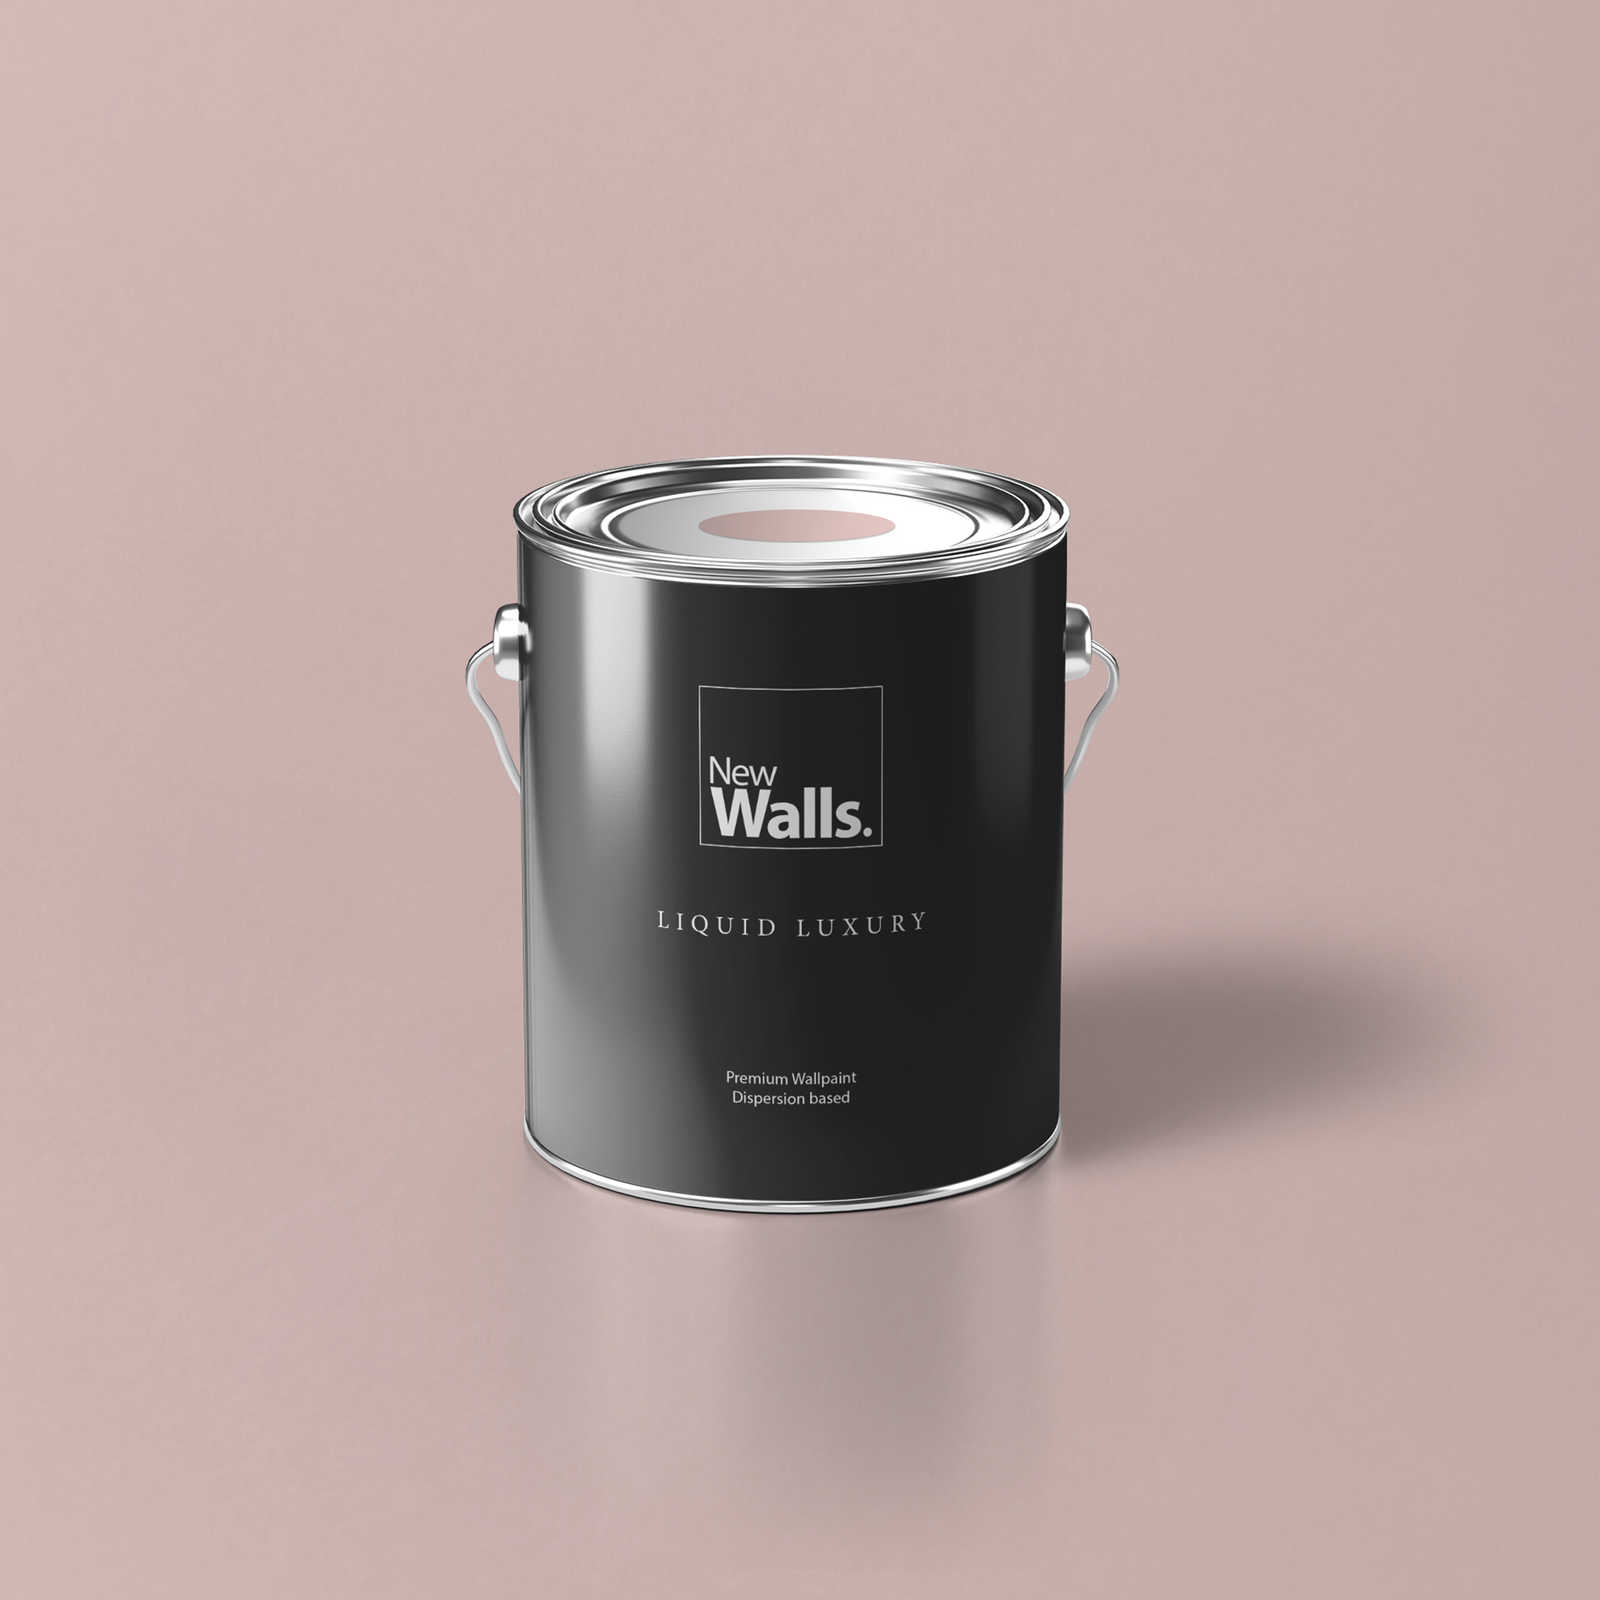 Premium Wall Paint Soft Old Pink »Natural Nude« NW1013 – 2.5 litre
